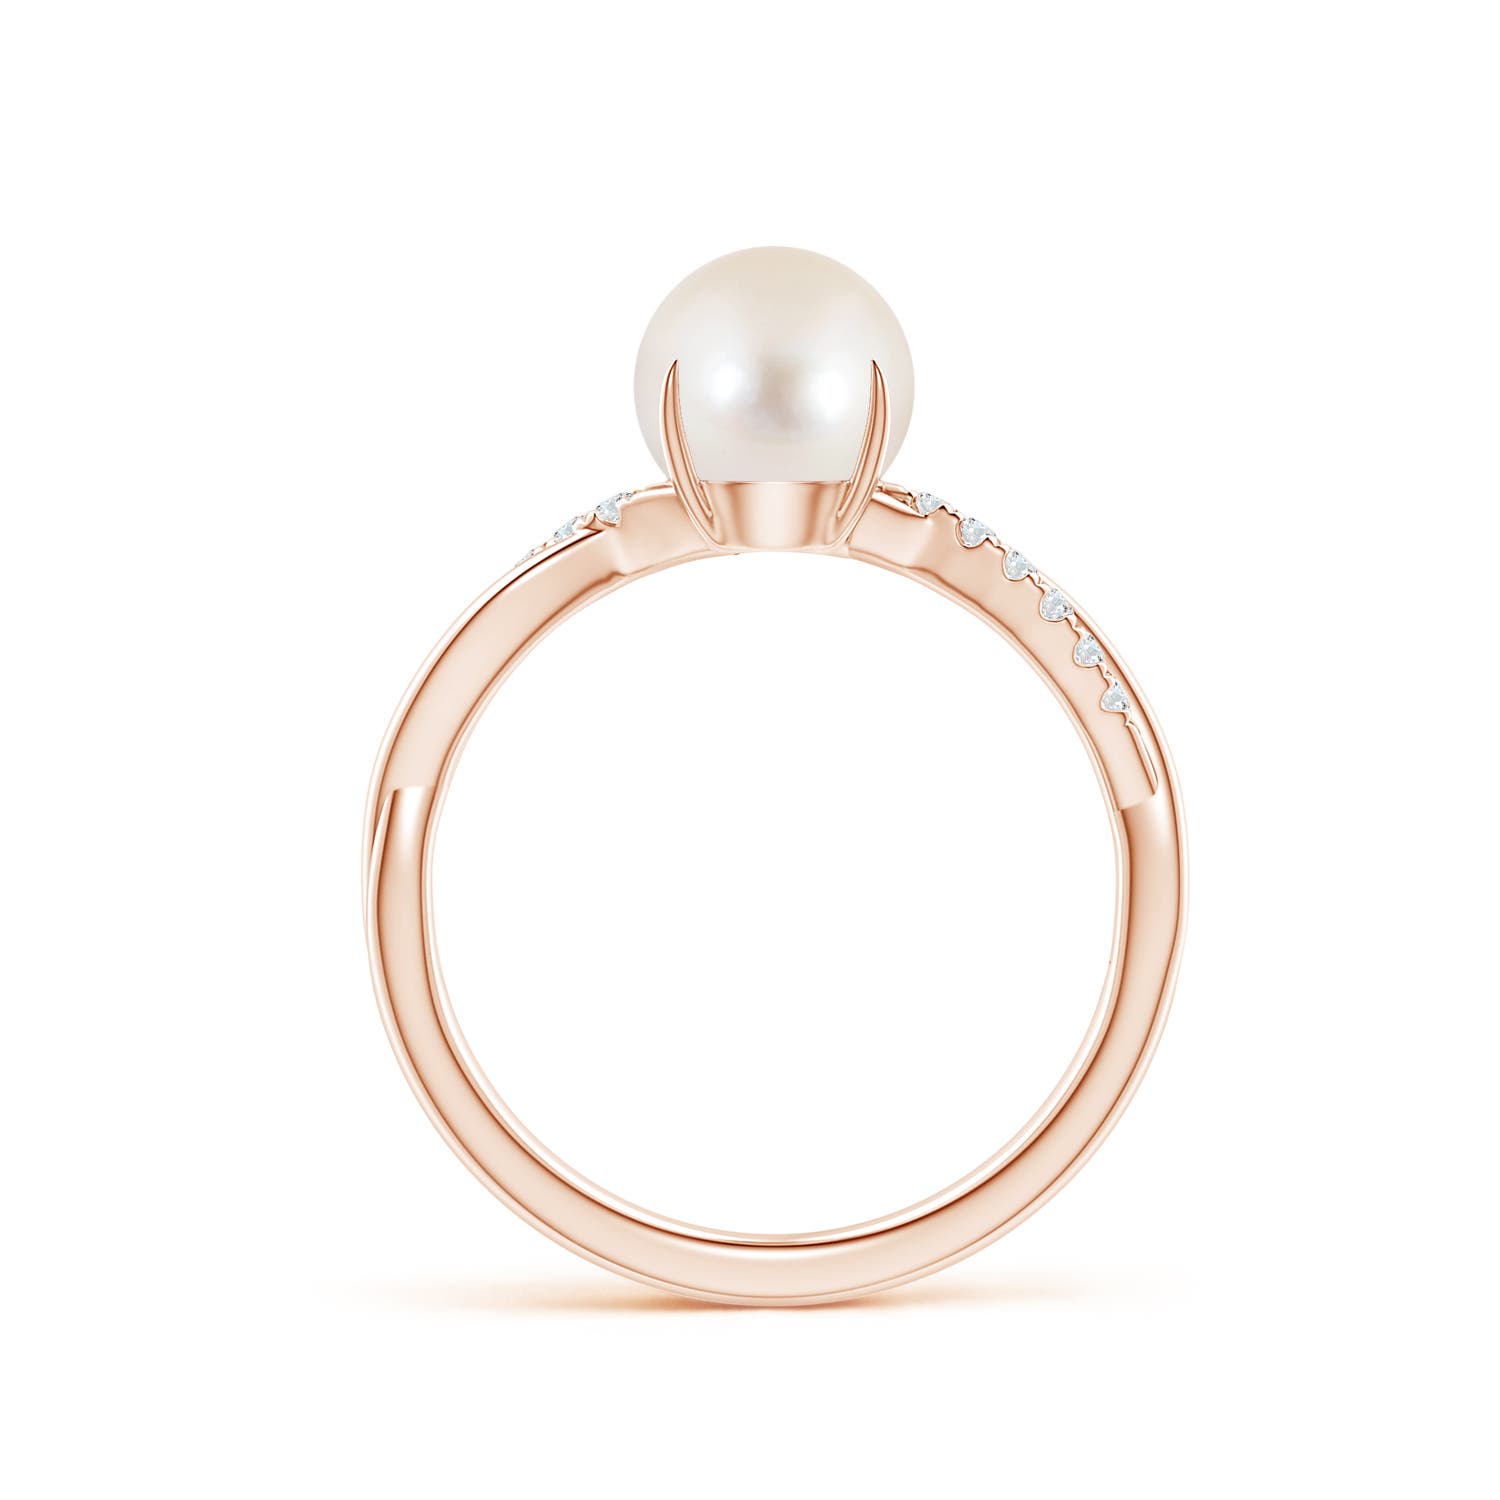 AAAA / 2.6 CT / 14 KT Rose Gold